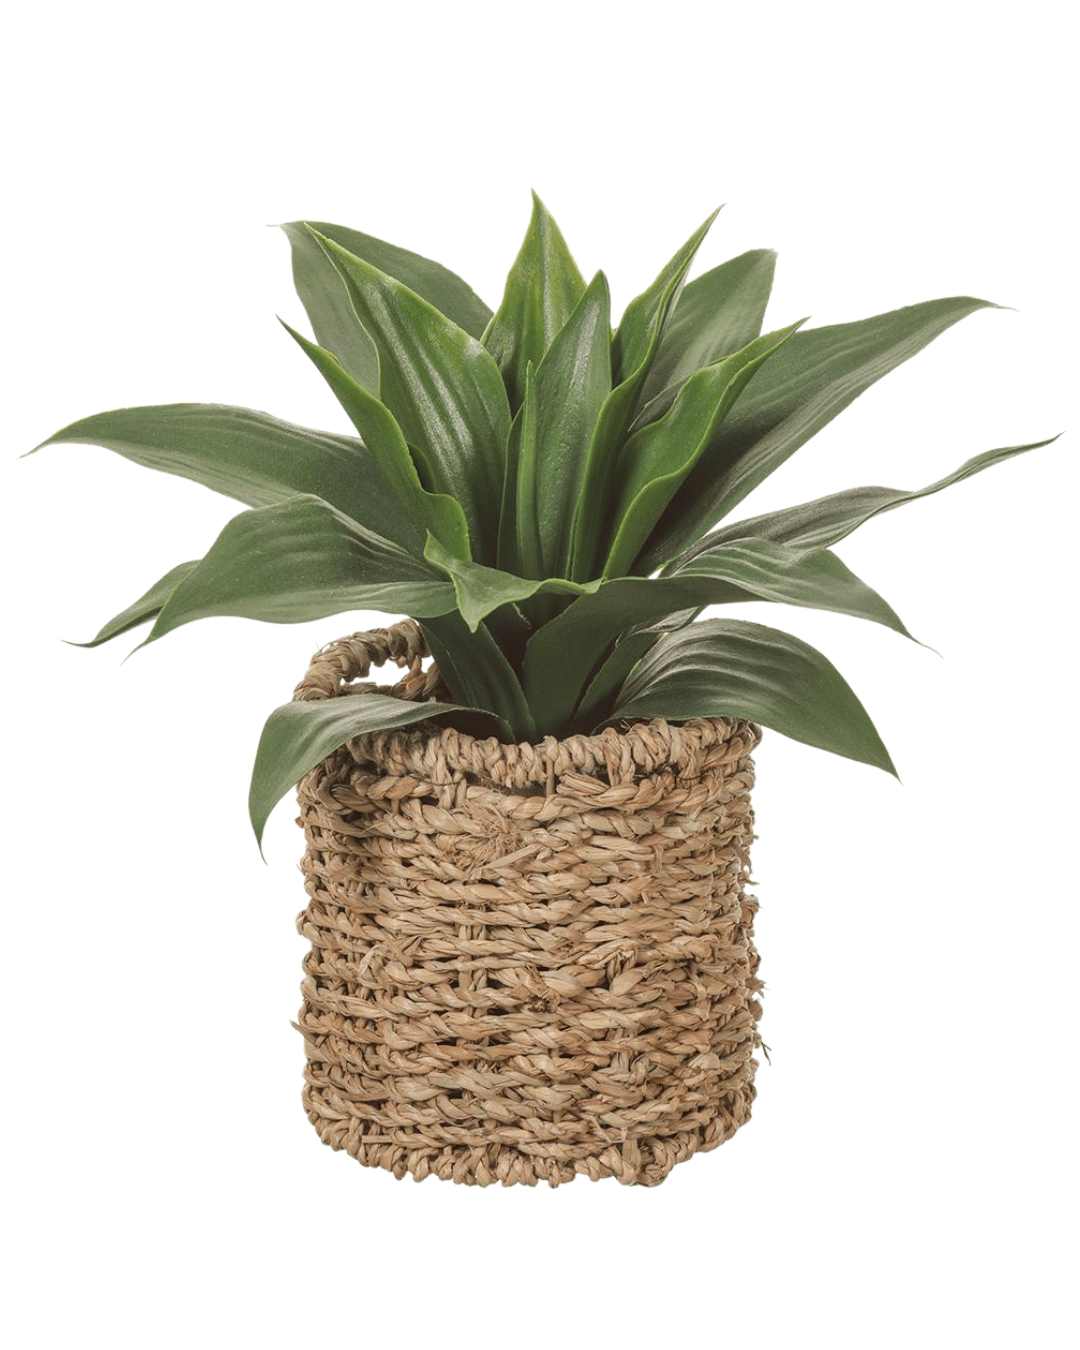 A healthy green 10" Agave in Basket plant with long, pointed leaves sits in a woven basket on a white background in a Scottsdale Arizona bungalow.